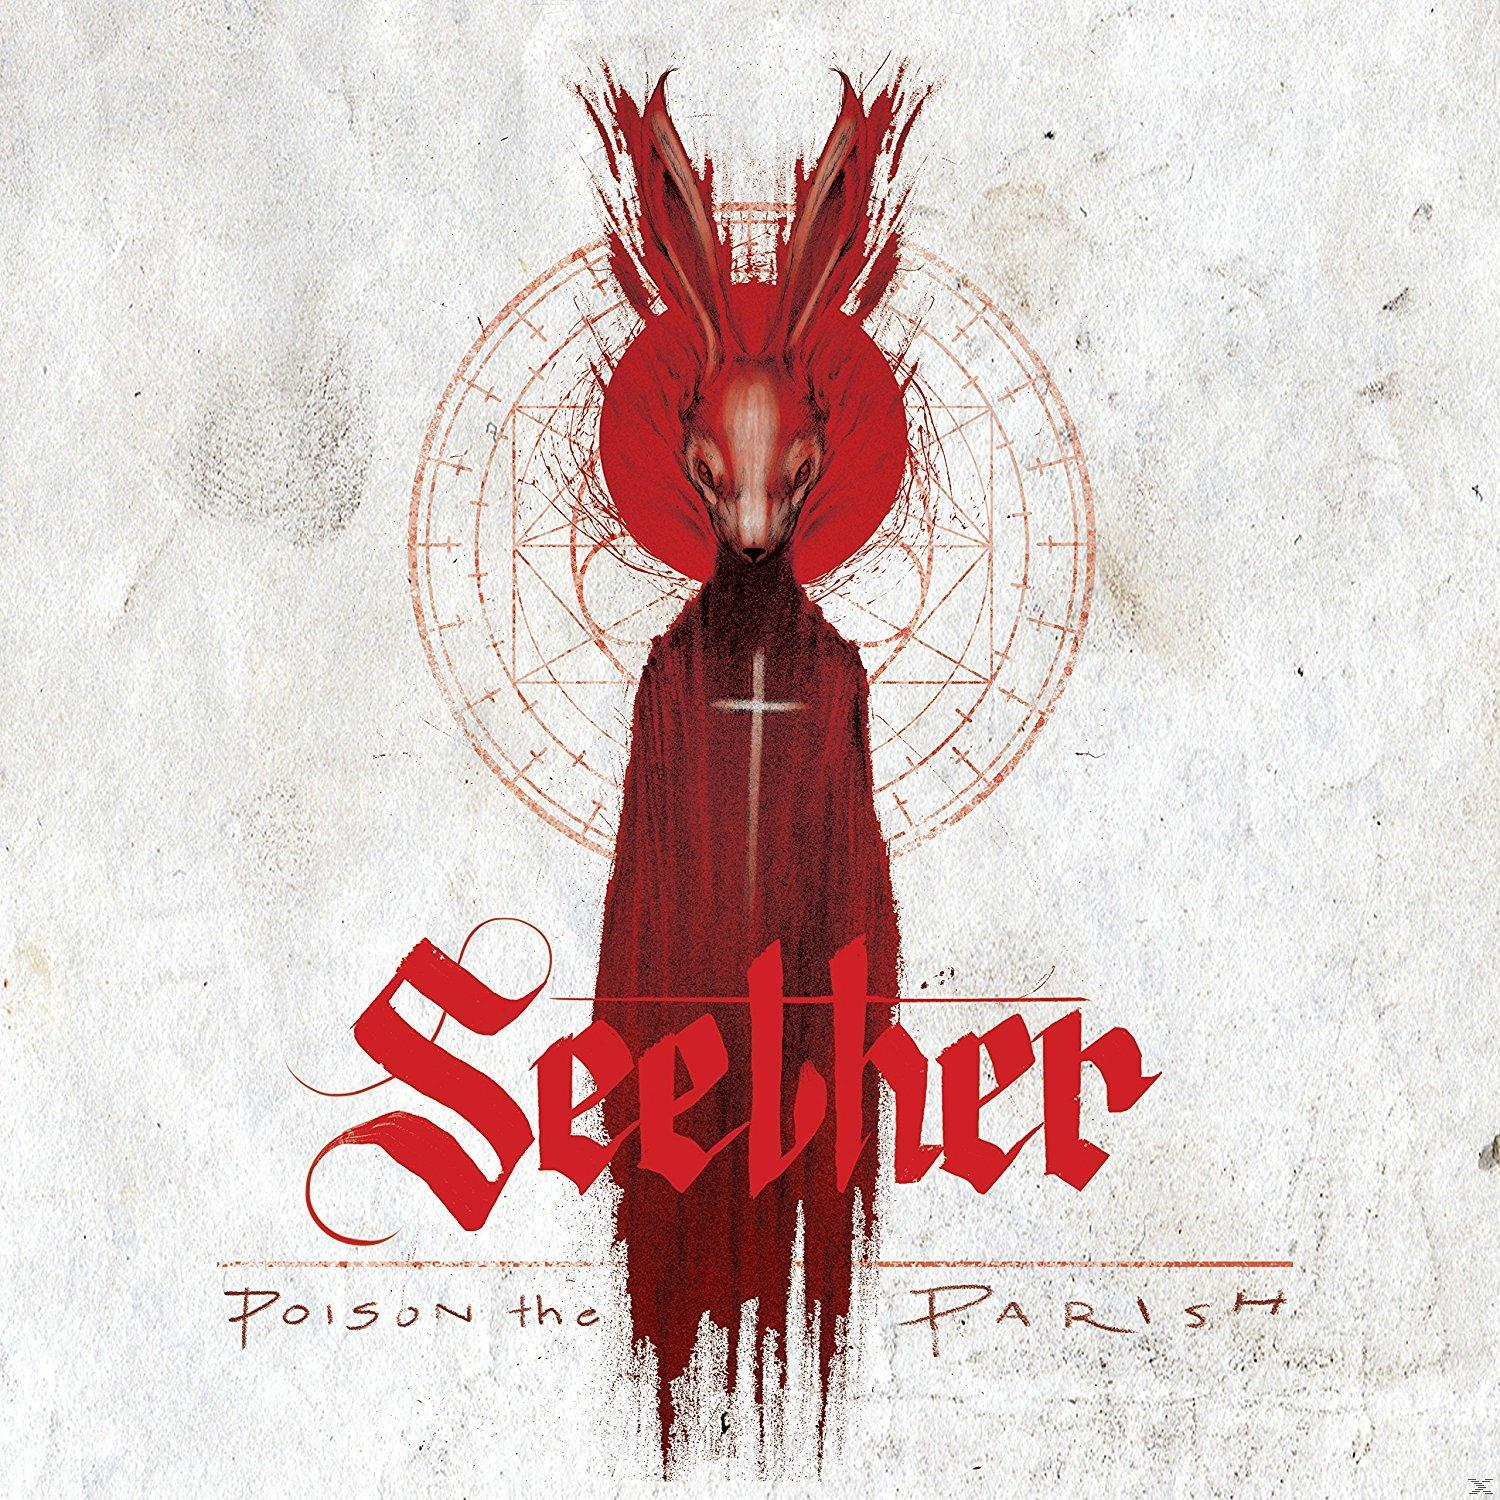 Seether - Poison Parish The - (CD) Edt.) (Deluxe